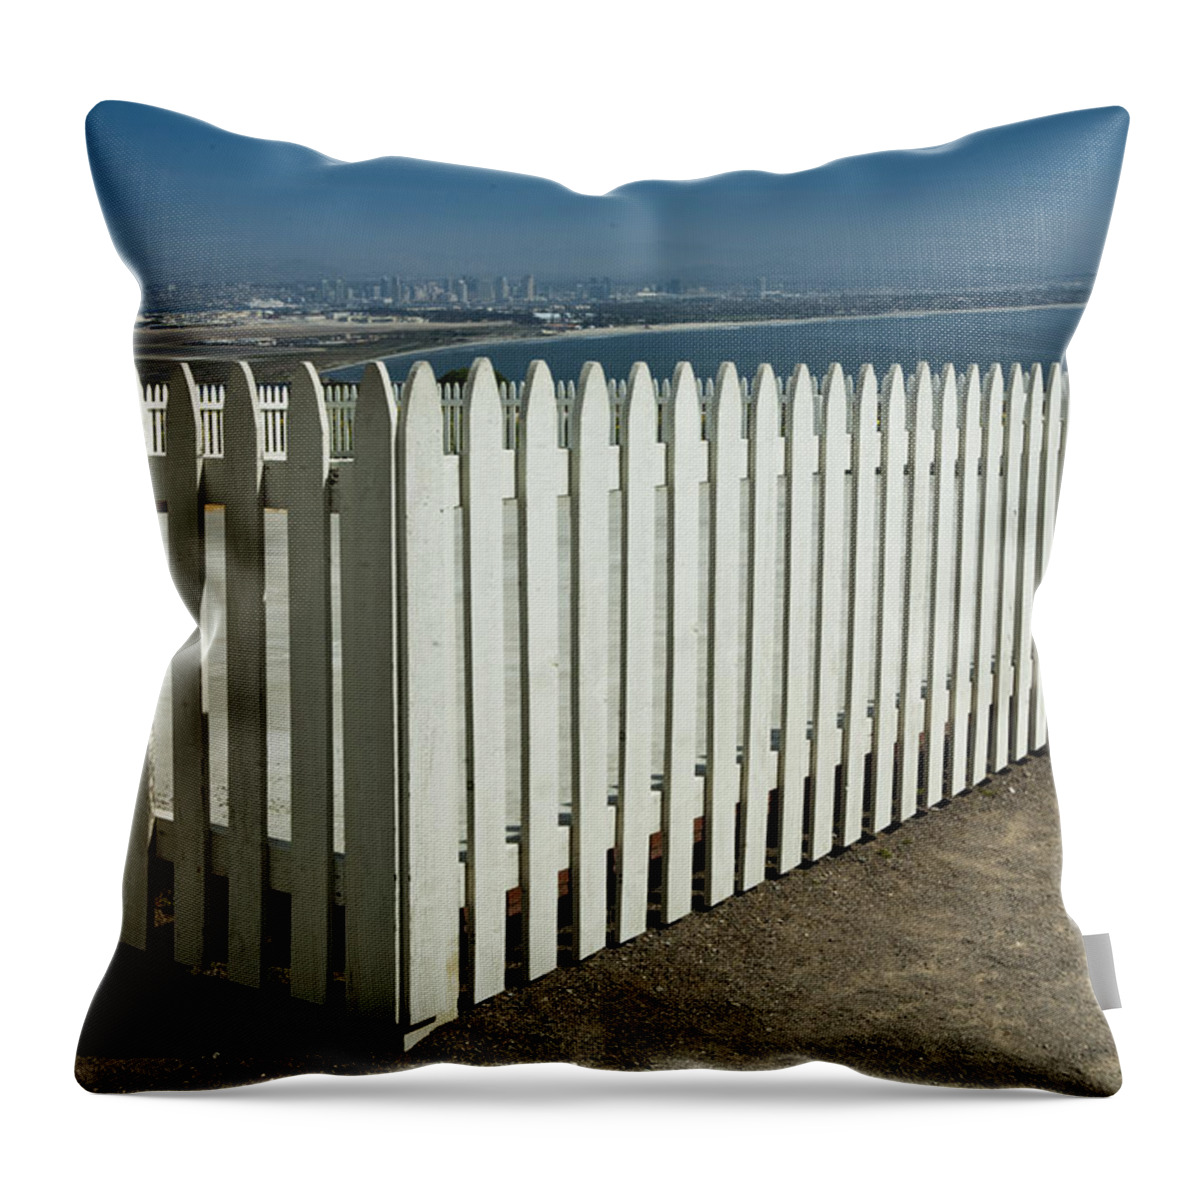 Art Throw Pillow featuring the photograph Picket Fence by the Cabrillo National Monument Lighthouse in San Diego by Randall Nyhof